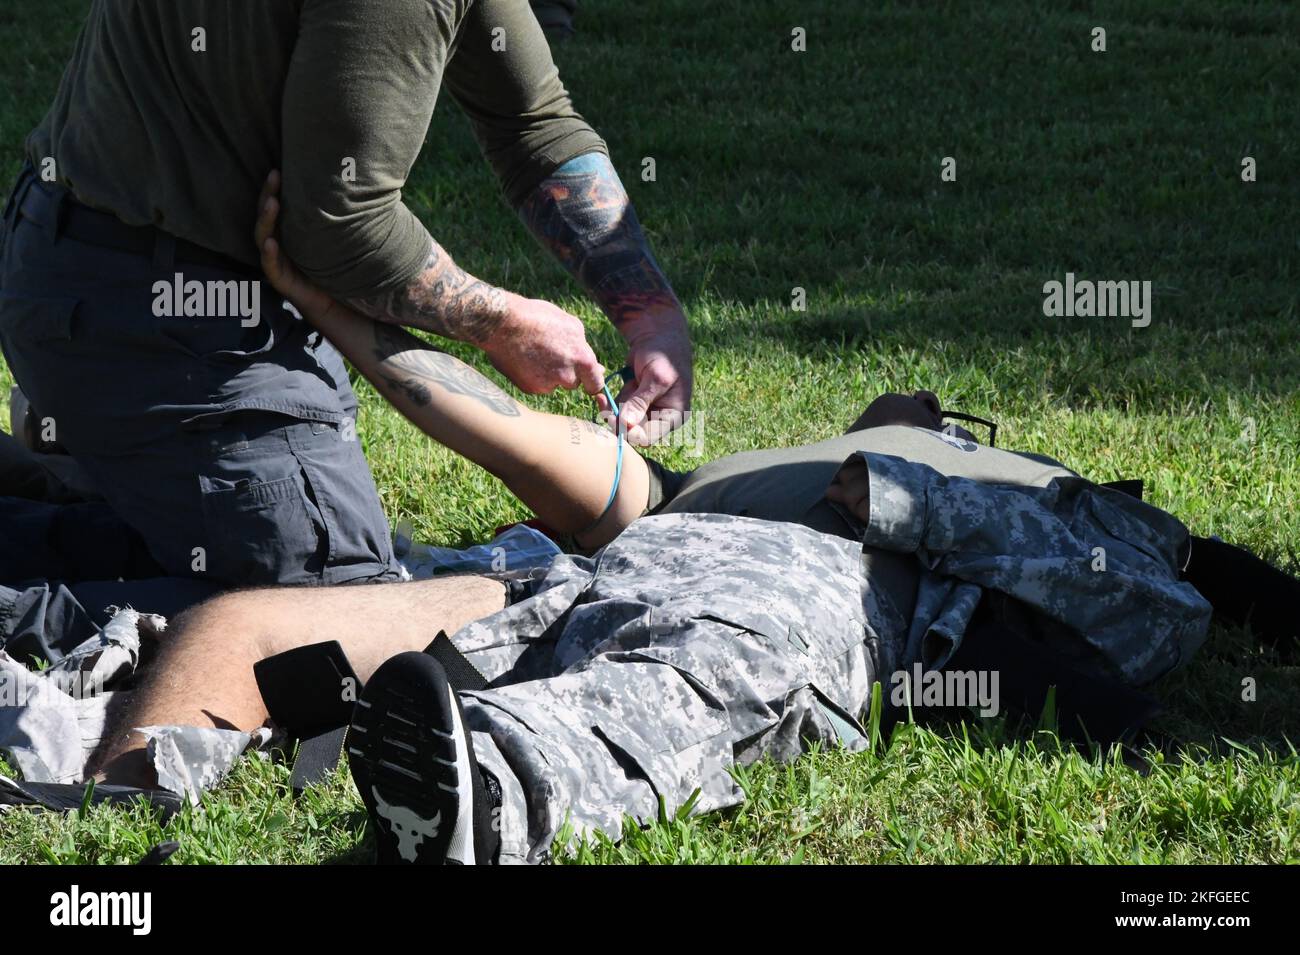 The Military Free Fall School located at Yuma Proving Ground planned a full-scale medical exercise to practice what could one day be a real emergency. The scenario that played out on Cox Field on the morning of Sept. 15 involved a jumper who injured his leg when landing. Stock Photo